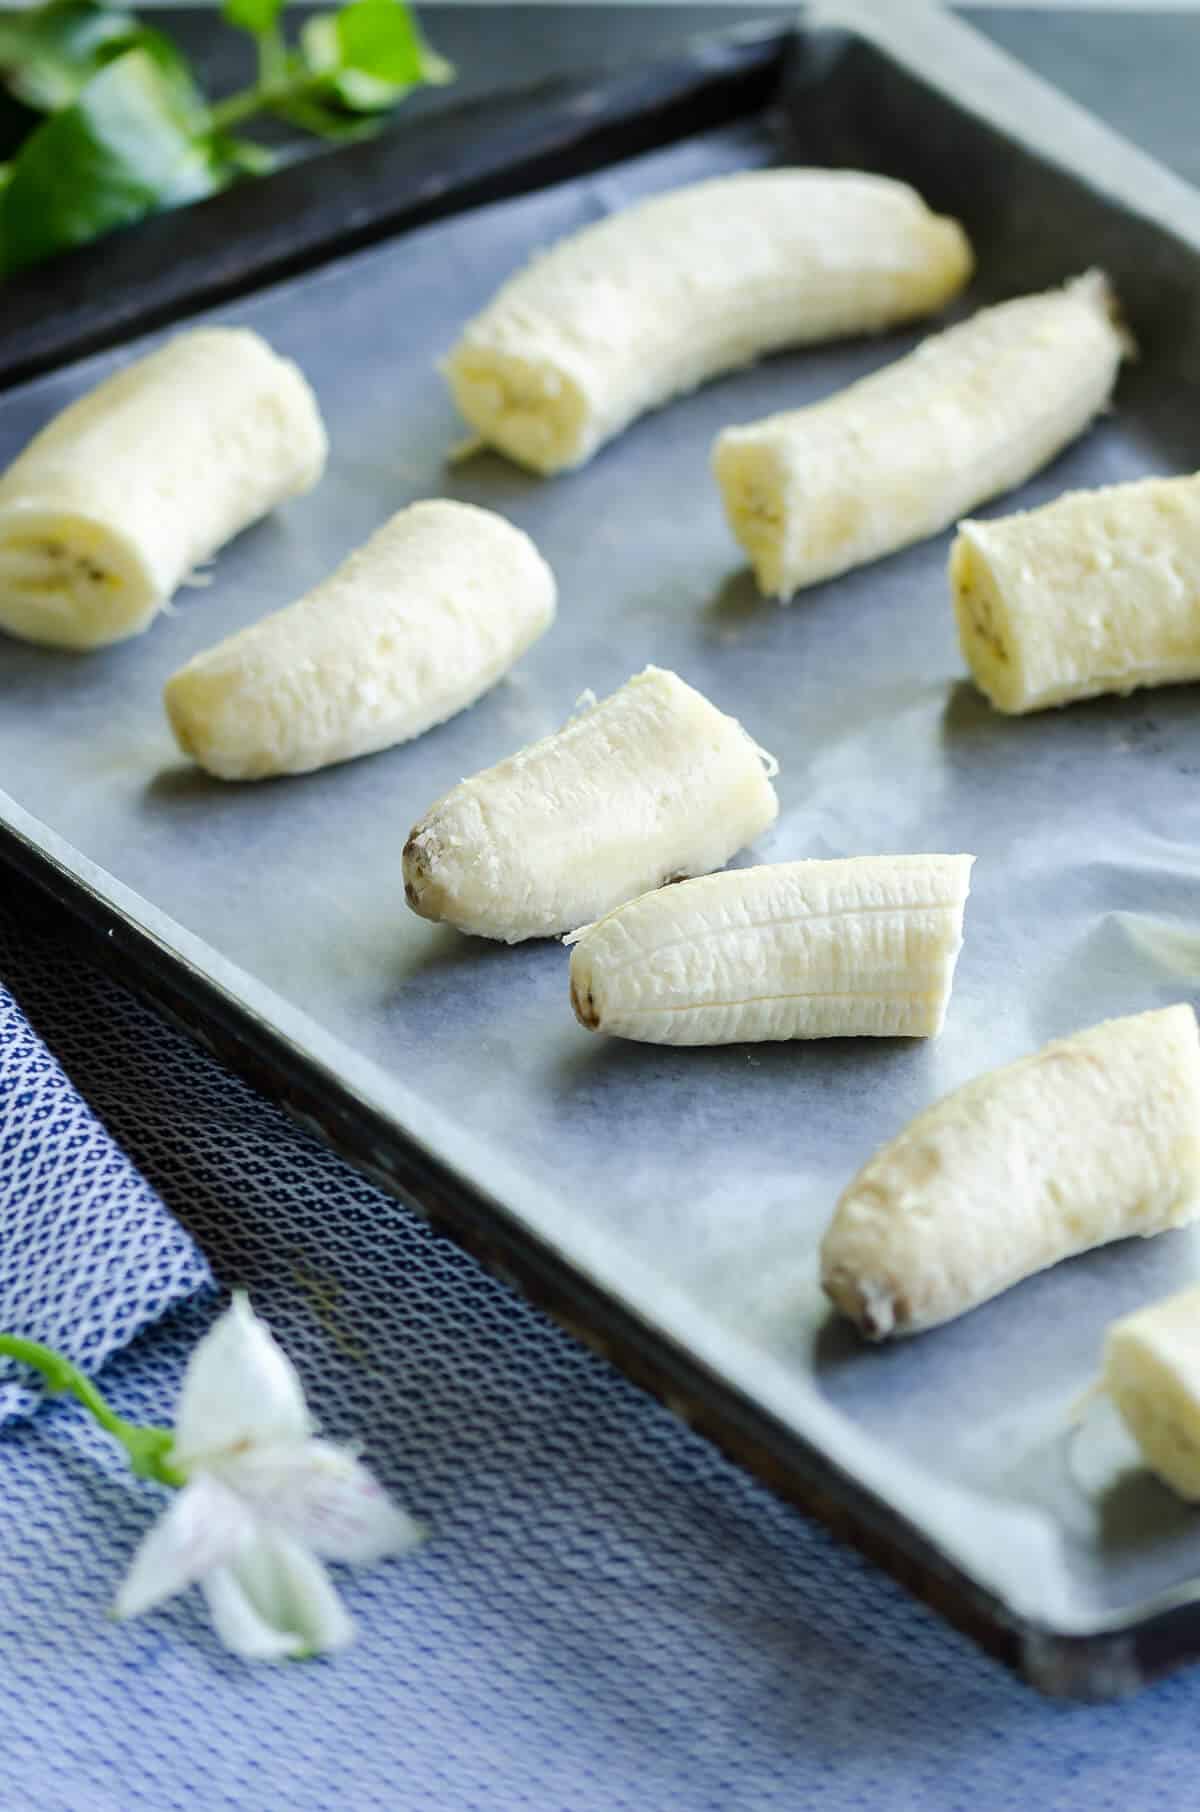 peeled bananas cut into thirds on a wax paper lined baking sheet ready to freeze.